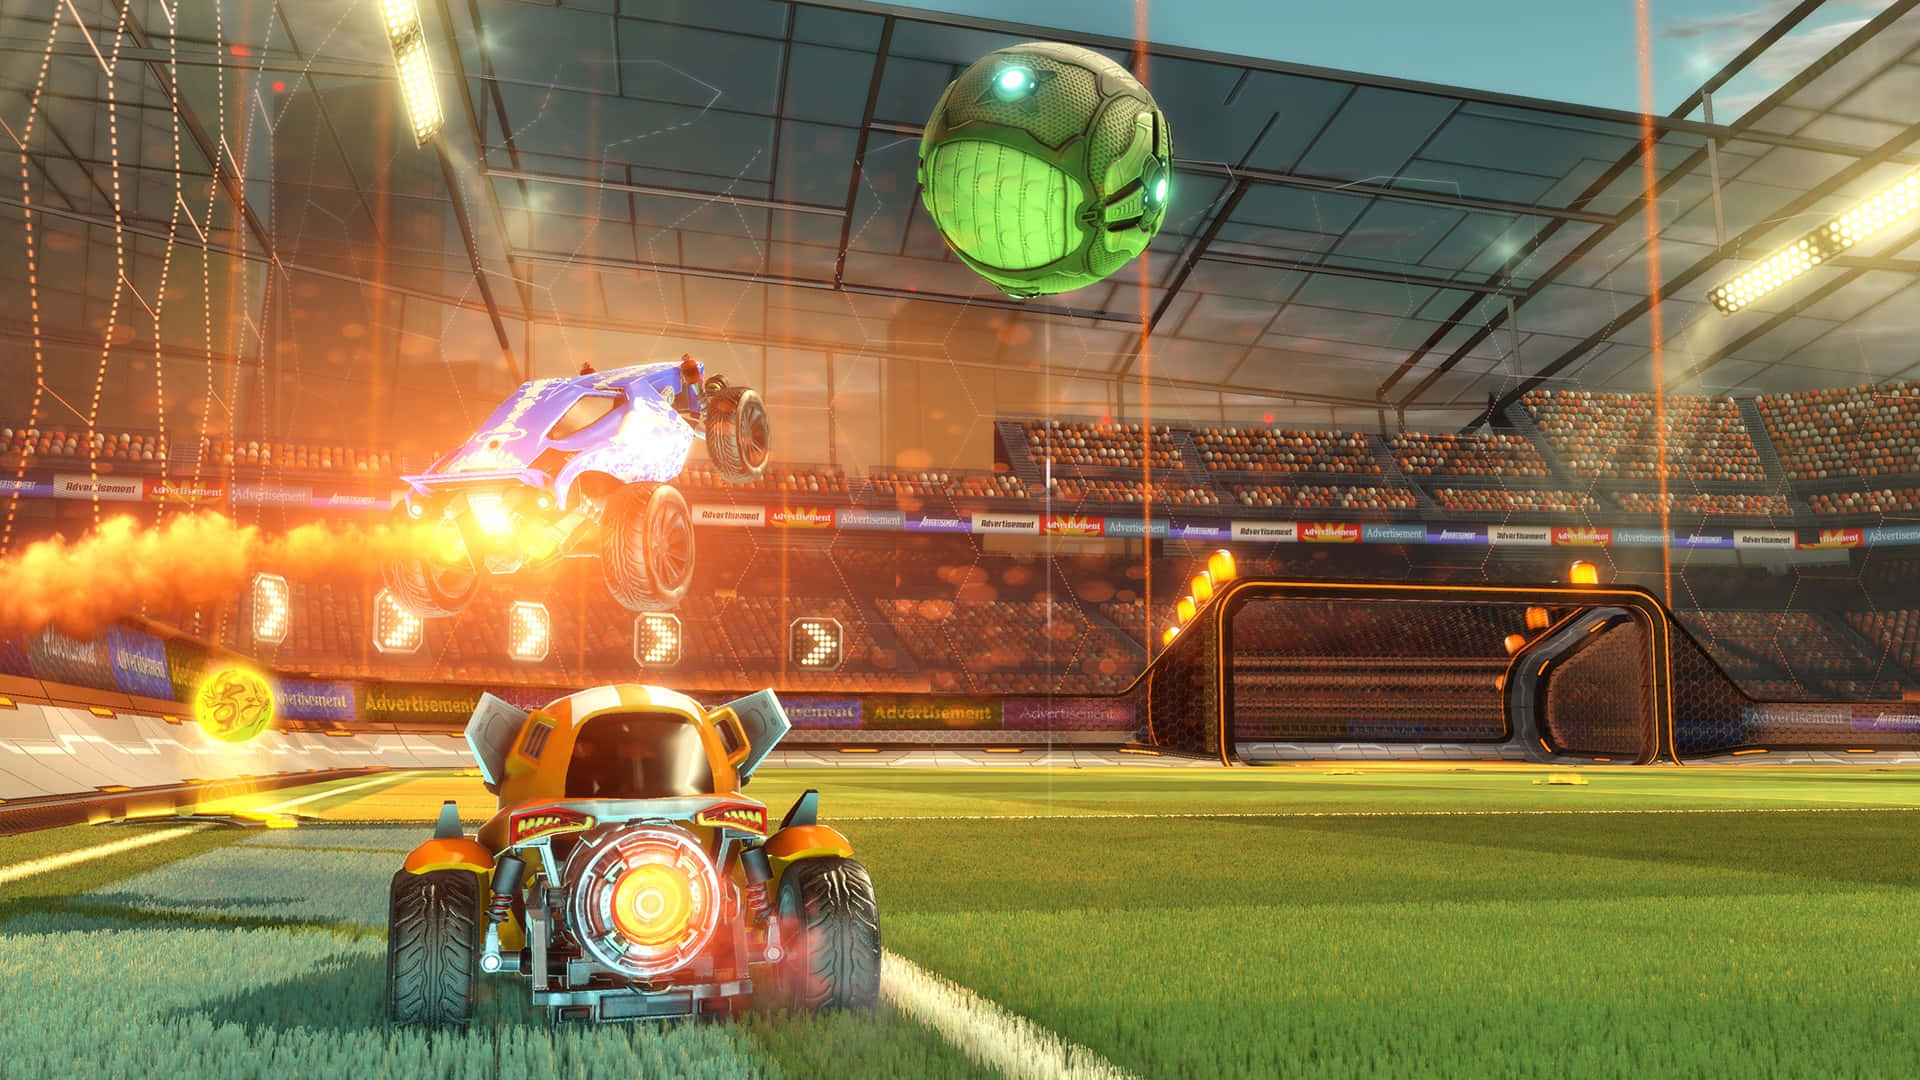 Get Ready for some High-Octane Rocket League Action!